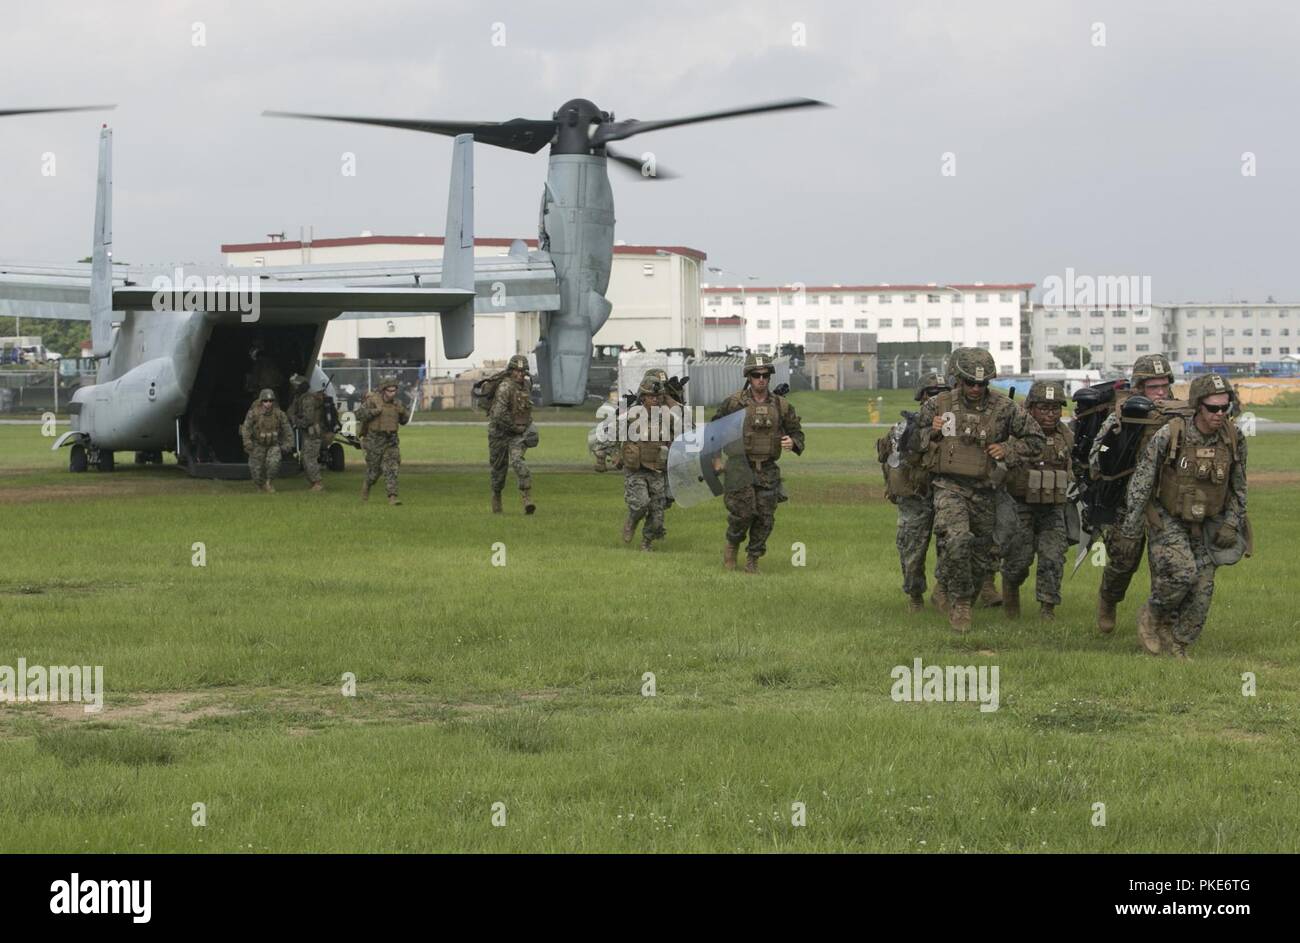 Marines with Fox Battery, Battalion Landing Team, 2nd Battalion, 5th Marines, exit an MV-22B Osprey during on-off drills at Camp Hansen, Okinawa, Japan, July, 26, 2018. Fox Battery Marines provide a precision fire capability as the artillery element attached to BLT 2/5 the Ground Combat Element for the 31st Marine Expeditionary Unit. The Osprey belongs to Marine Medium Tiltrotor Squadron 262 (Reinforced), the aviation combat element for the 31st MEU. The 31st MEU, the Marine Corps’ only continuously forward-deployed MEU, provides a flexible force ready to perform a wide-range of military opera Stock Photo